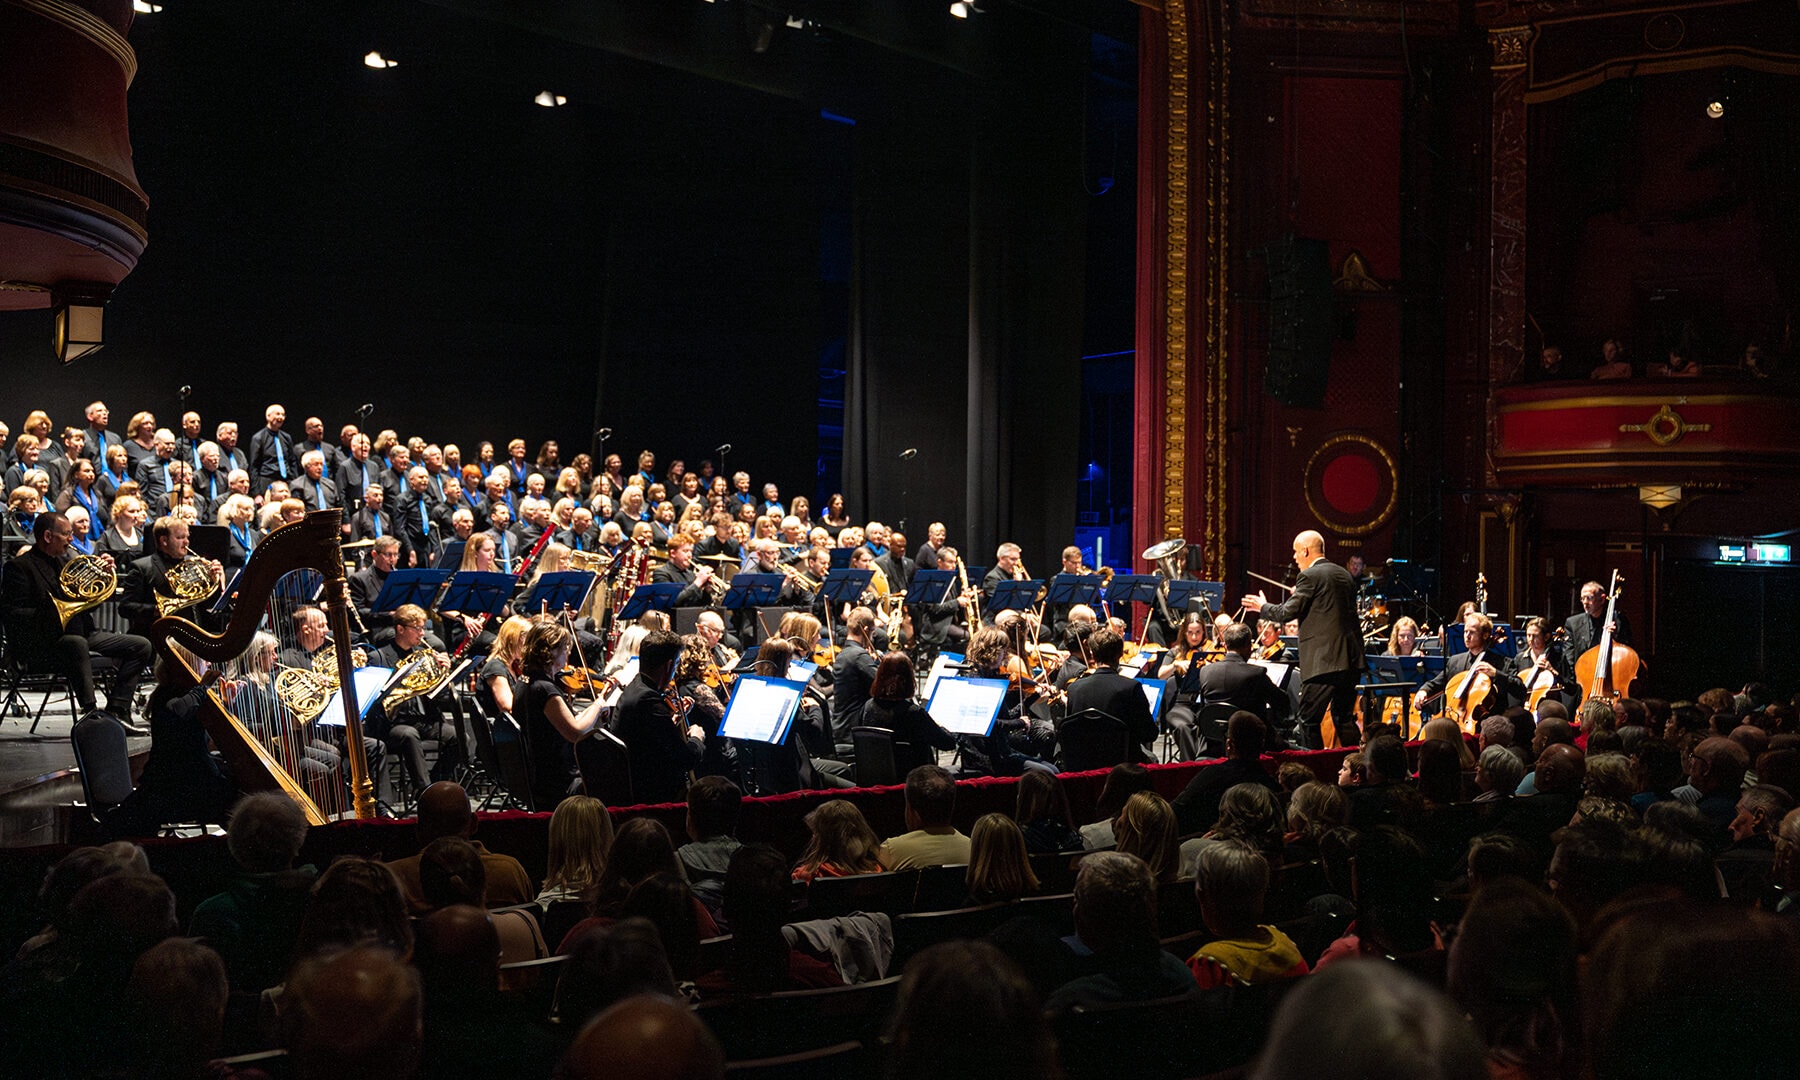 BSO Voices in concert at the Mayflower Southampton